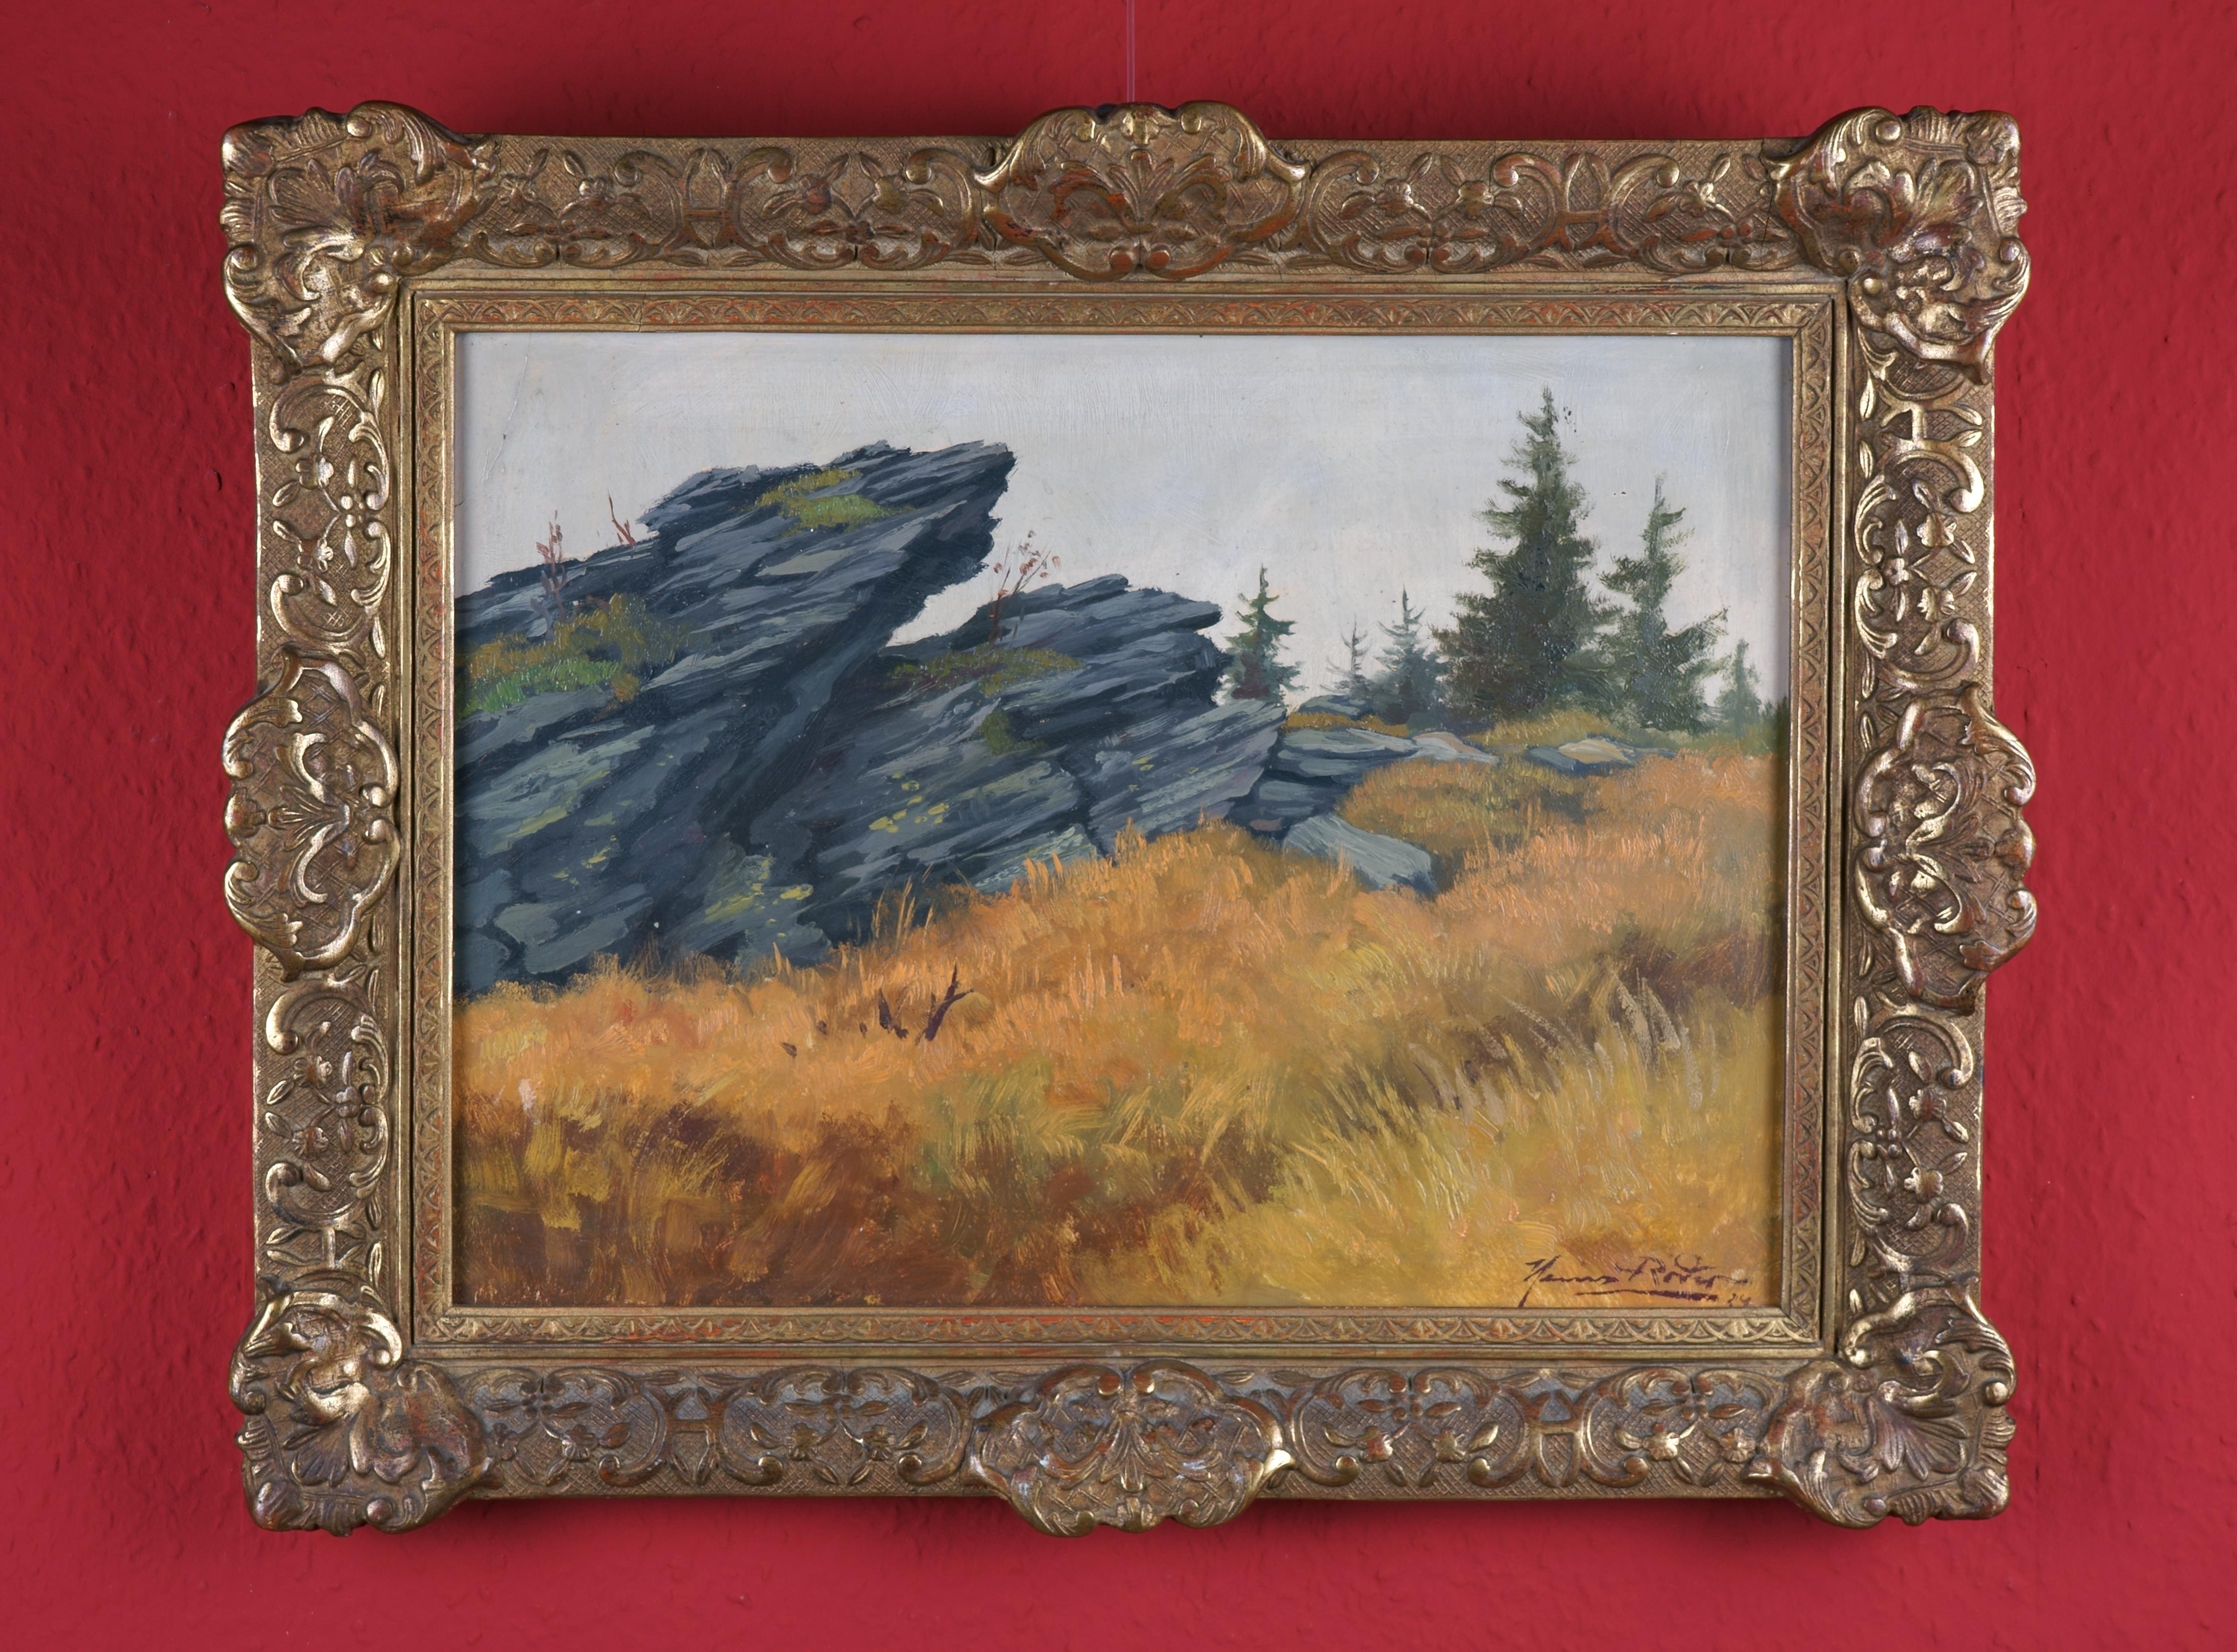 Low Mountain Landscape with Rocks - The mystery of an inconspicuous place - - Brown Landscape Painting by Heinz Roder